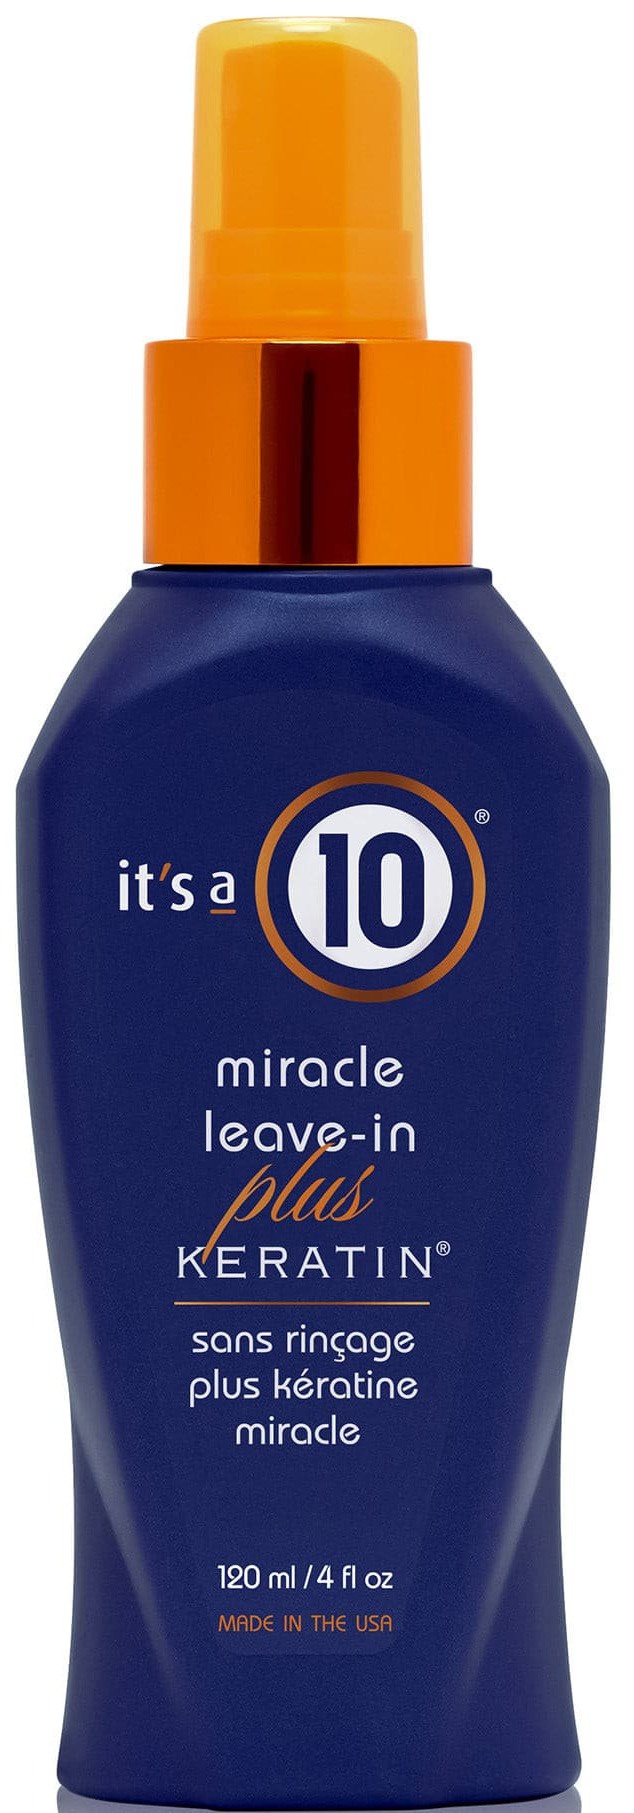 It's a 10 Haircare Miracle Leave-in Conditioner Plus Keratin